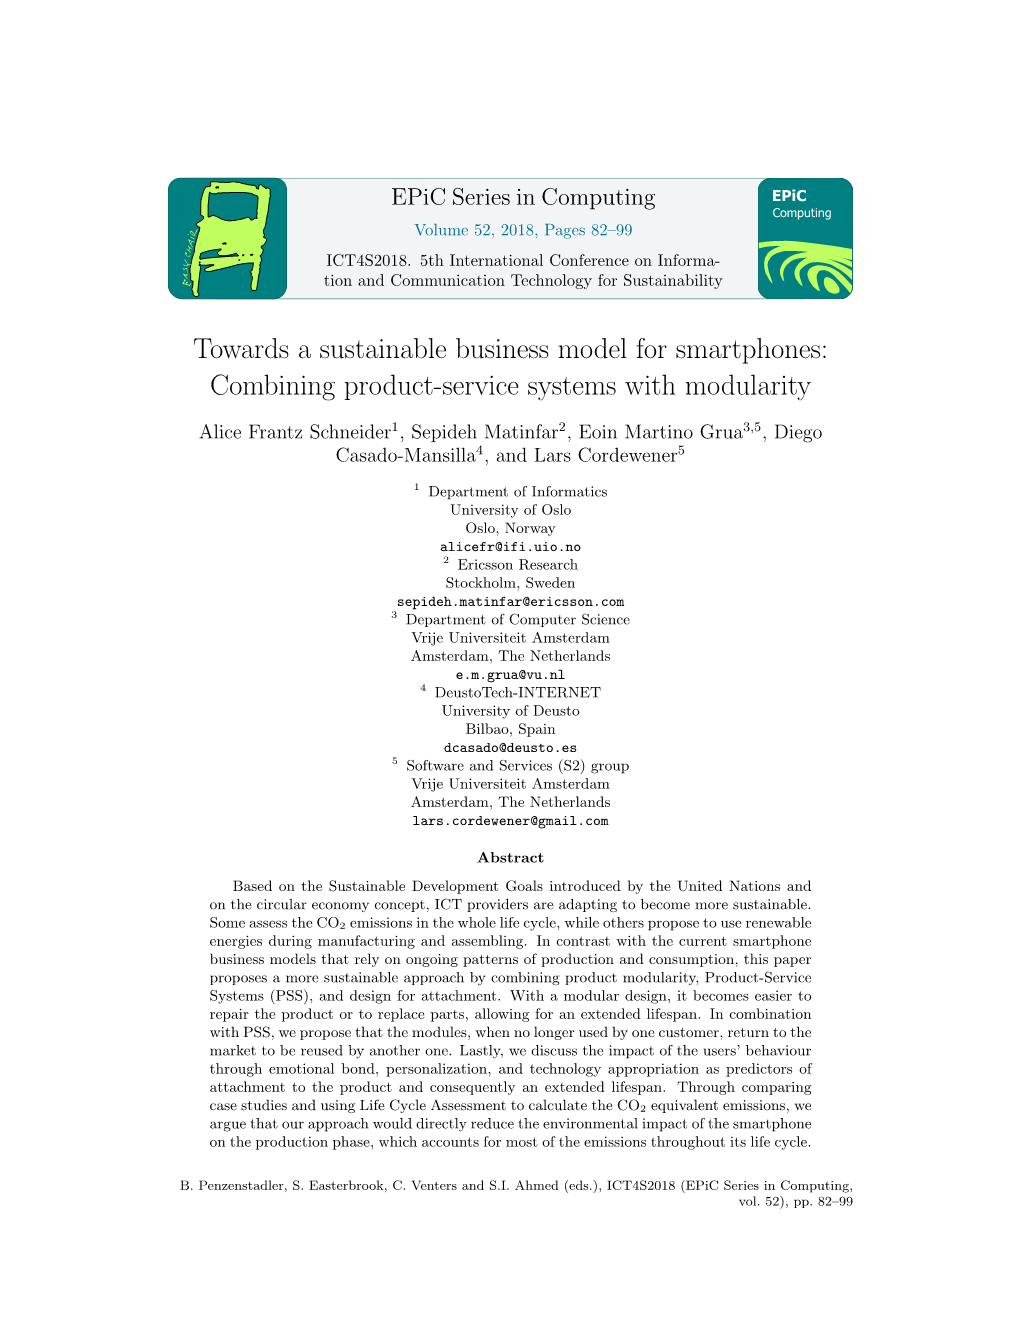 Towards a Sustainable Business Model for Smartphones: Combining Product-Service Systems with Modularity